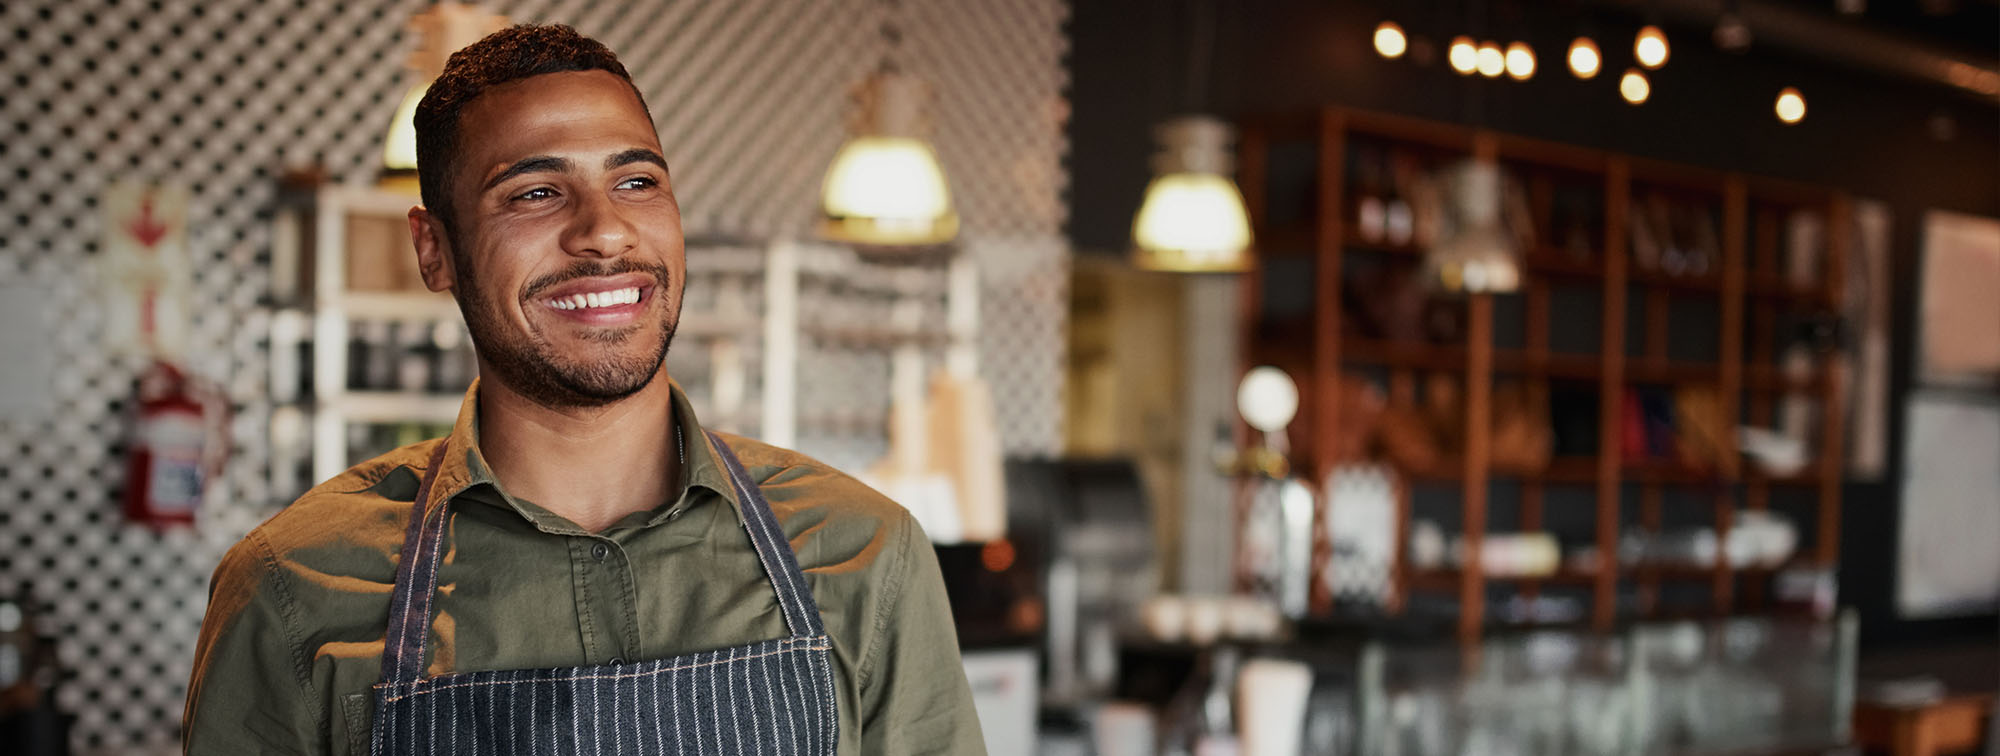 Small business owner smiling